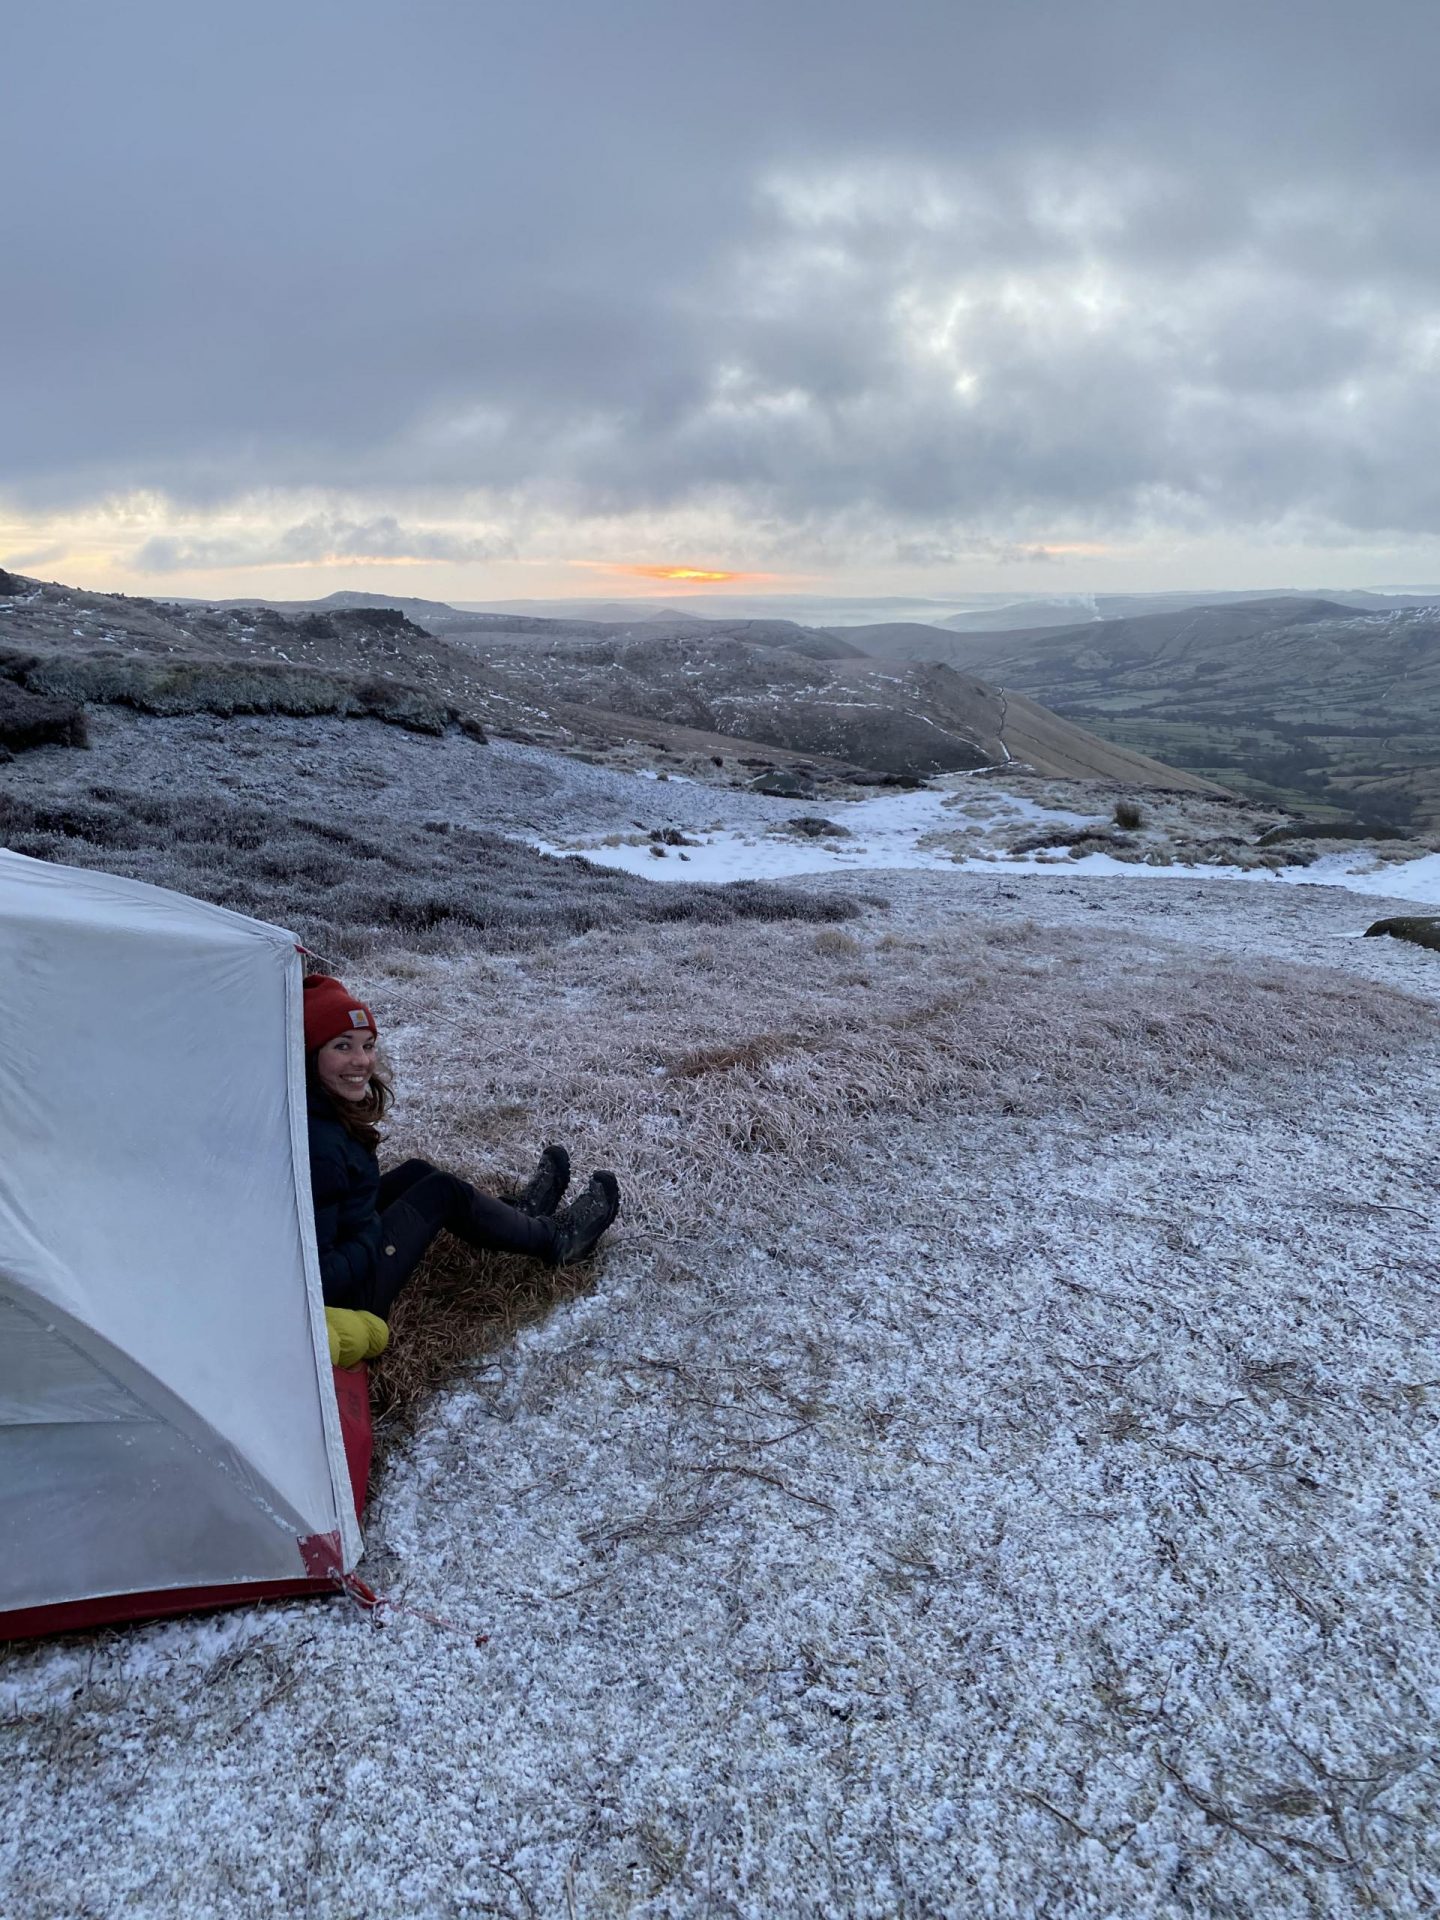 Winter camping guide: how to camp safely in the cold